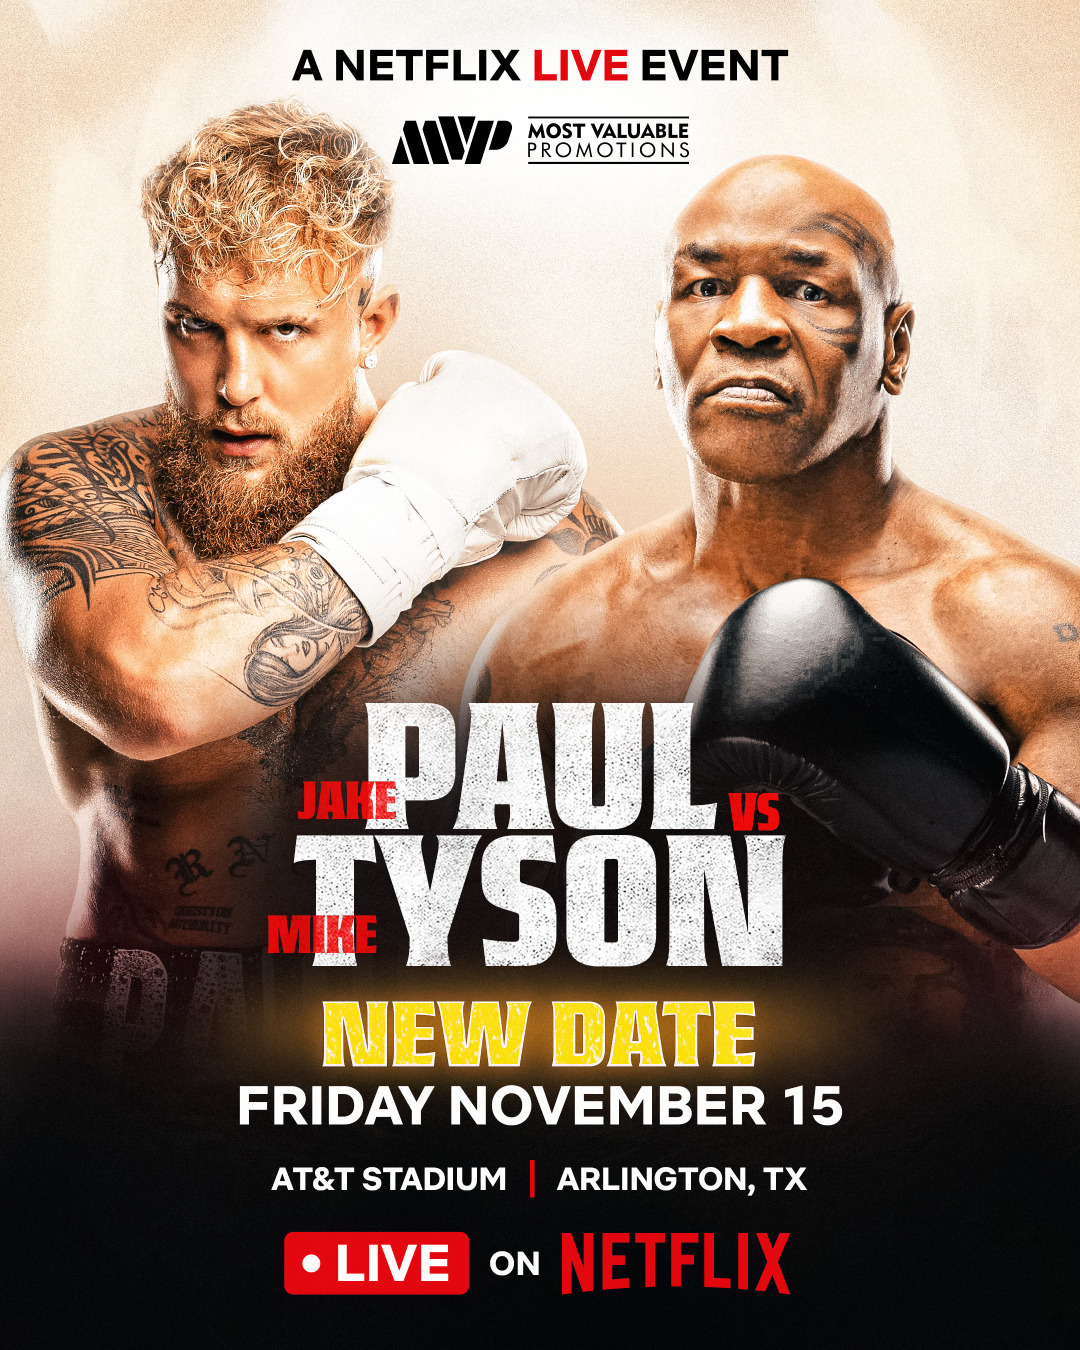 Extra Large TV Poster Image for Jake Paul vs. Mike Tyson 